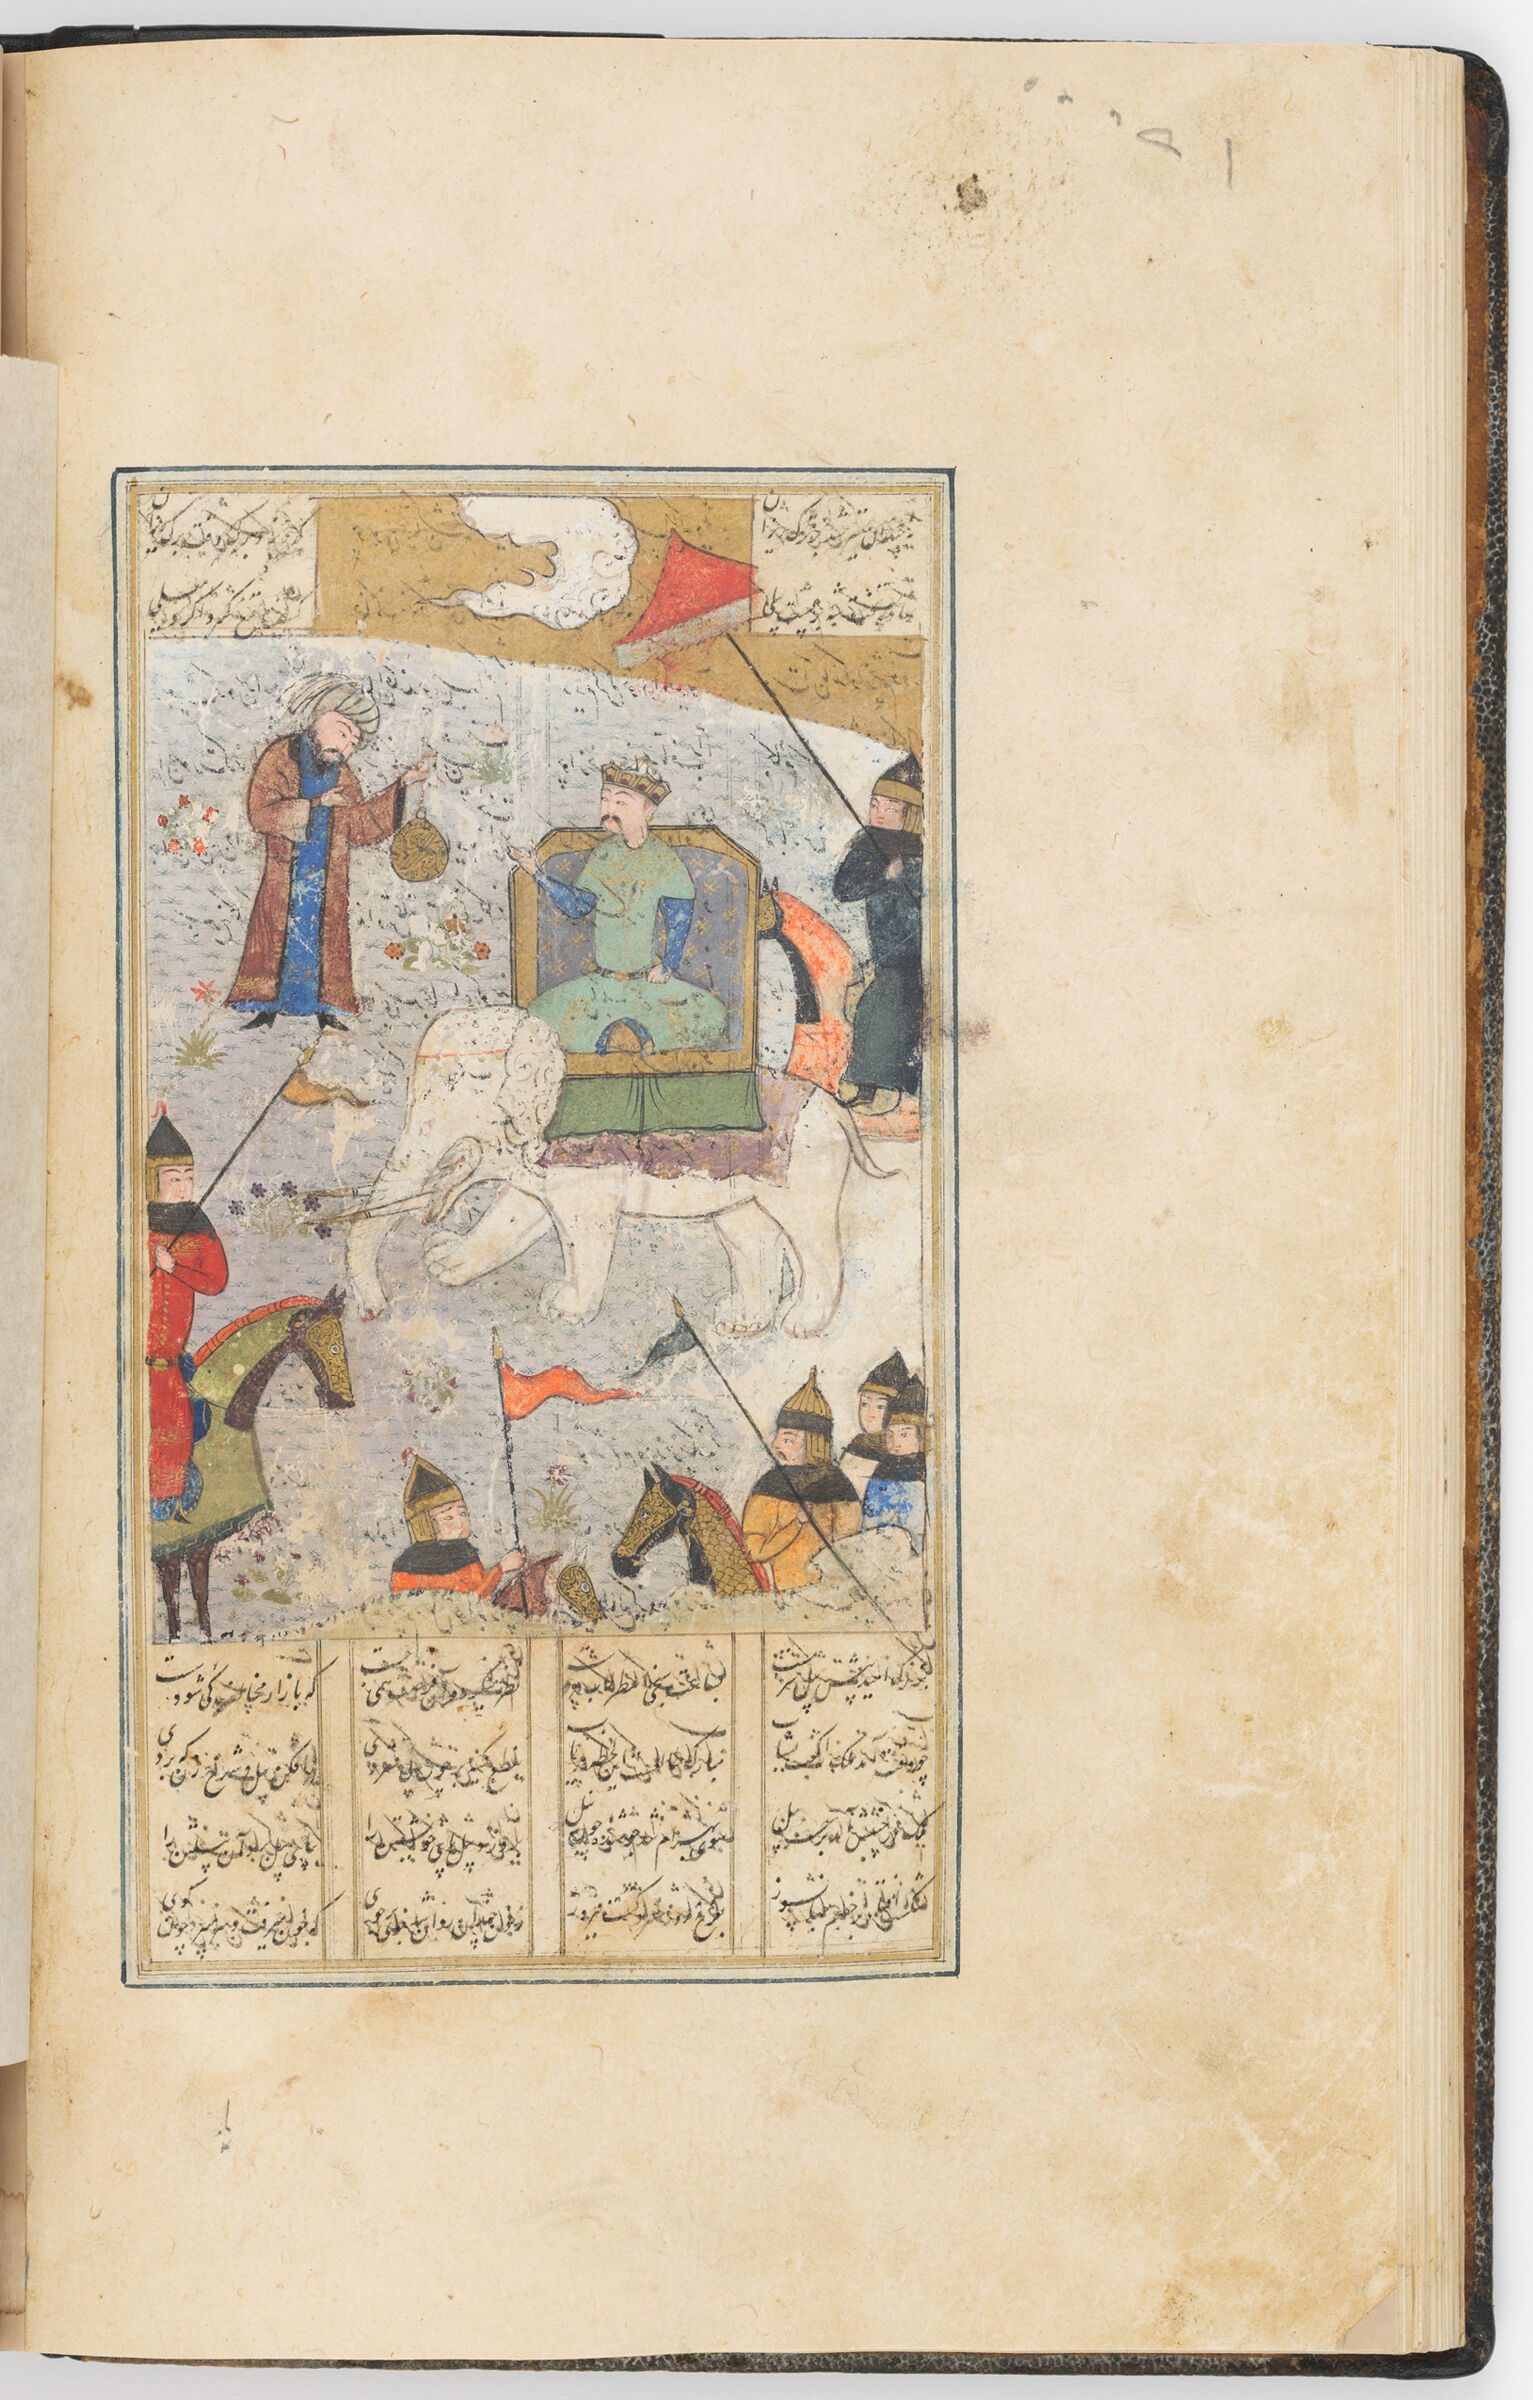 Battle Of Khusraw And Bahram Chubin (Text Recto; Painting Verso Of Folio 62), Painting From A Manuscript Of The Khamsa By Nizam